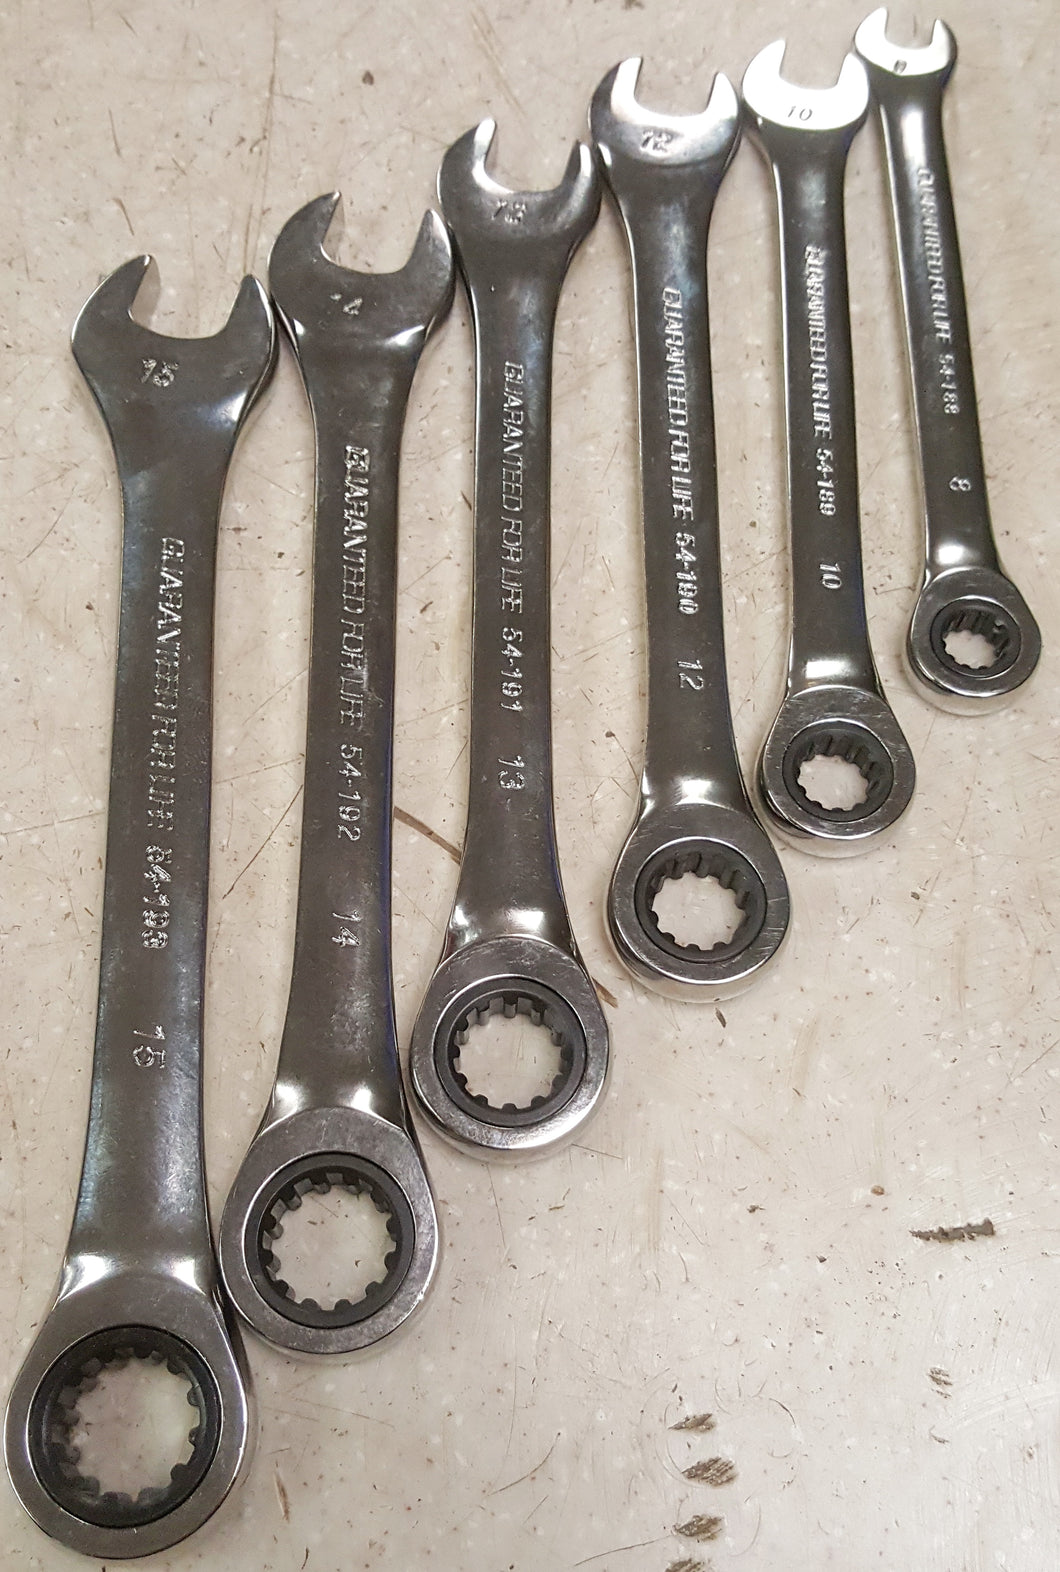 Duralast 64-140 6-Piece Metric Universal Ratcheting Wrench Set (8mm-15mm)